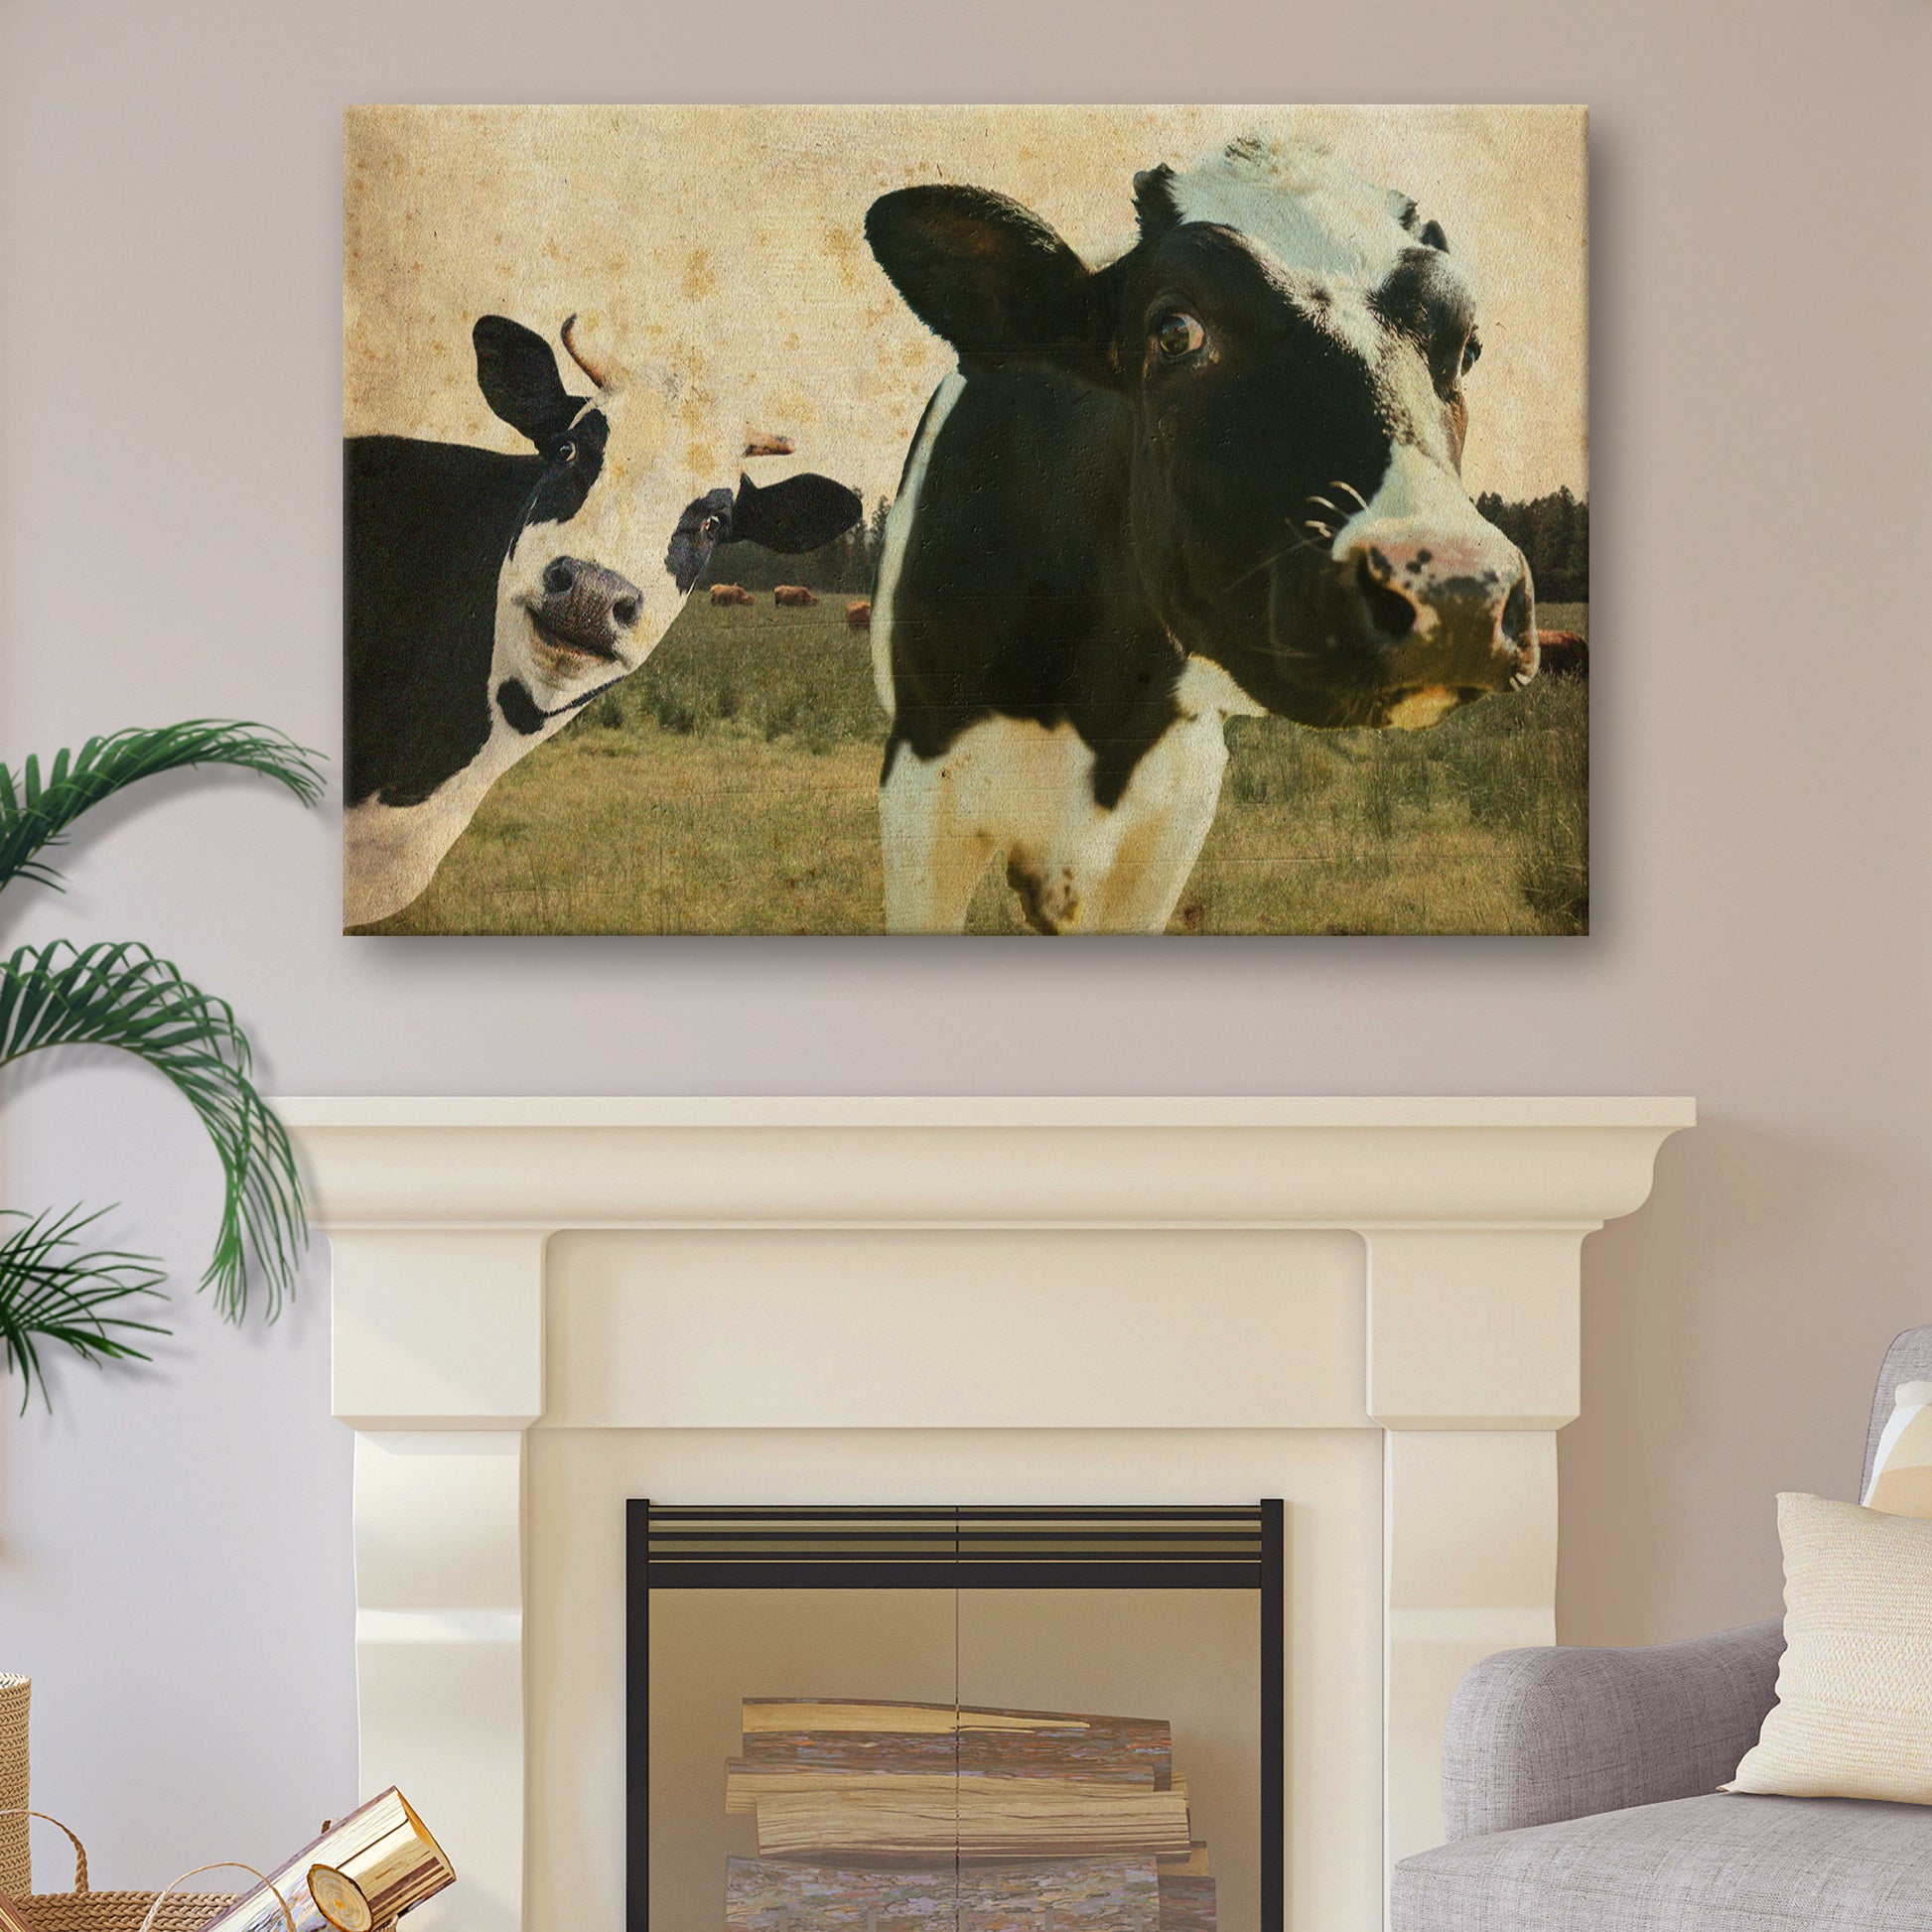 Rustic Curious Cows Canvas Wall Art - Image by Tailored Canvases